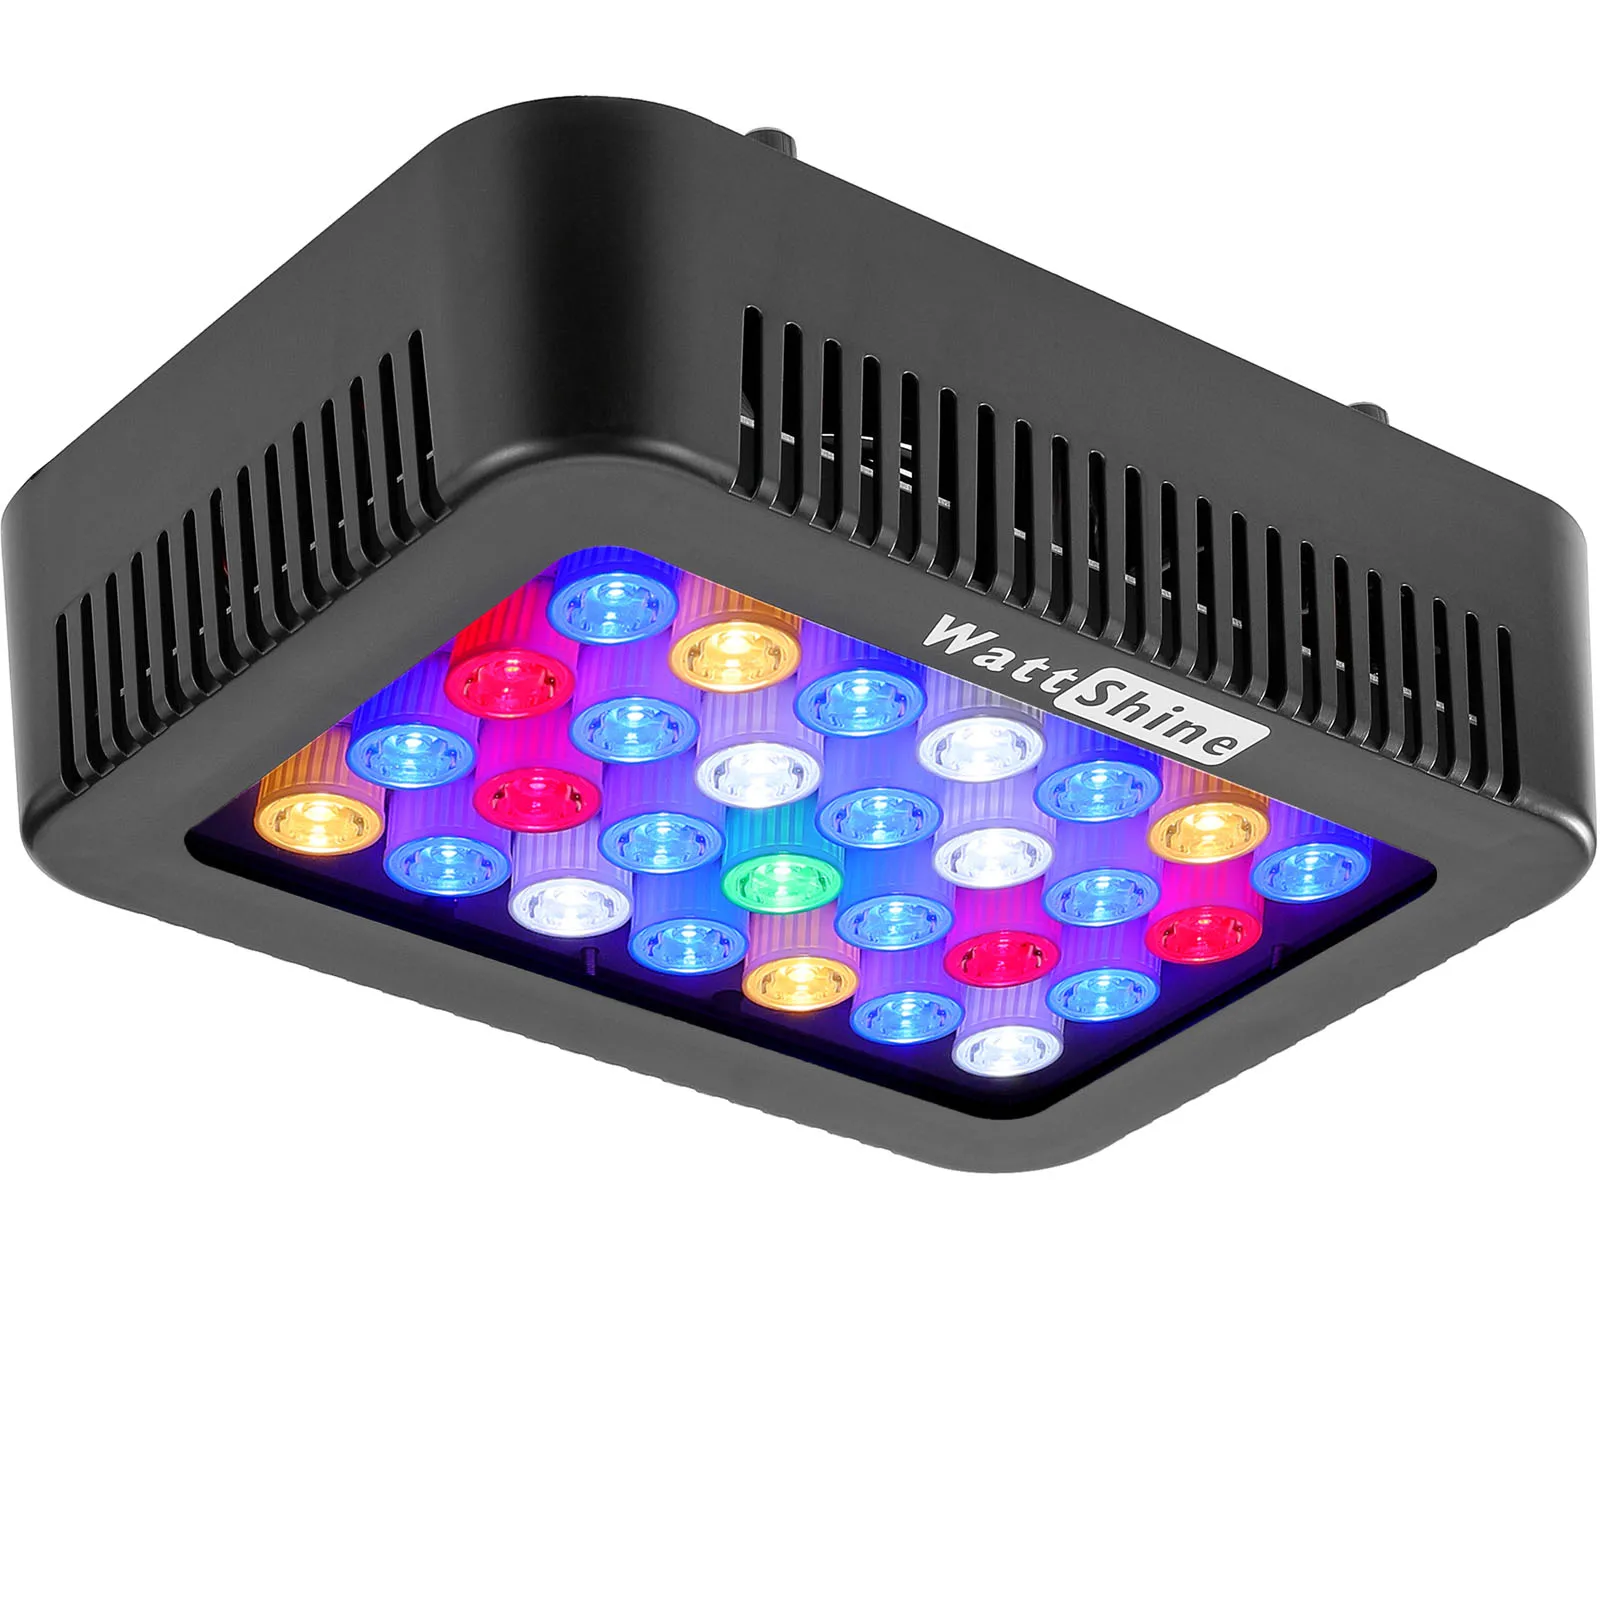 Aquarium Lighting 140W Full Spectrum LED Coral Reef Light with Dual Dimmable Channels for Carols LPS SPS Marine Fish Tank